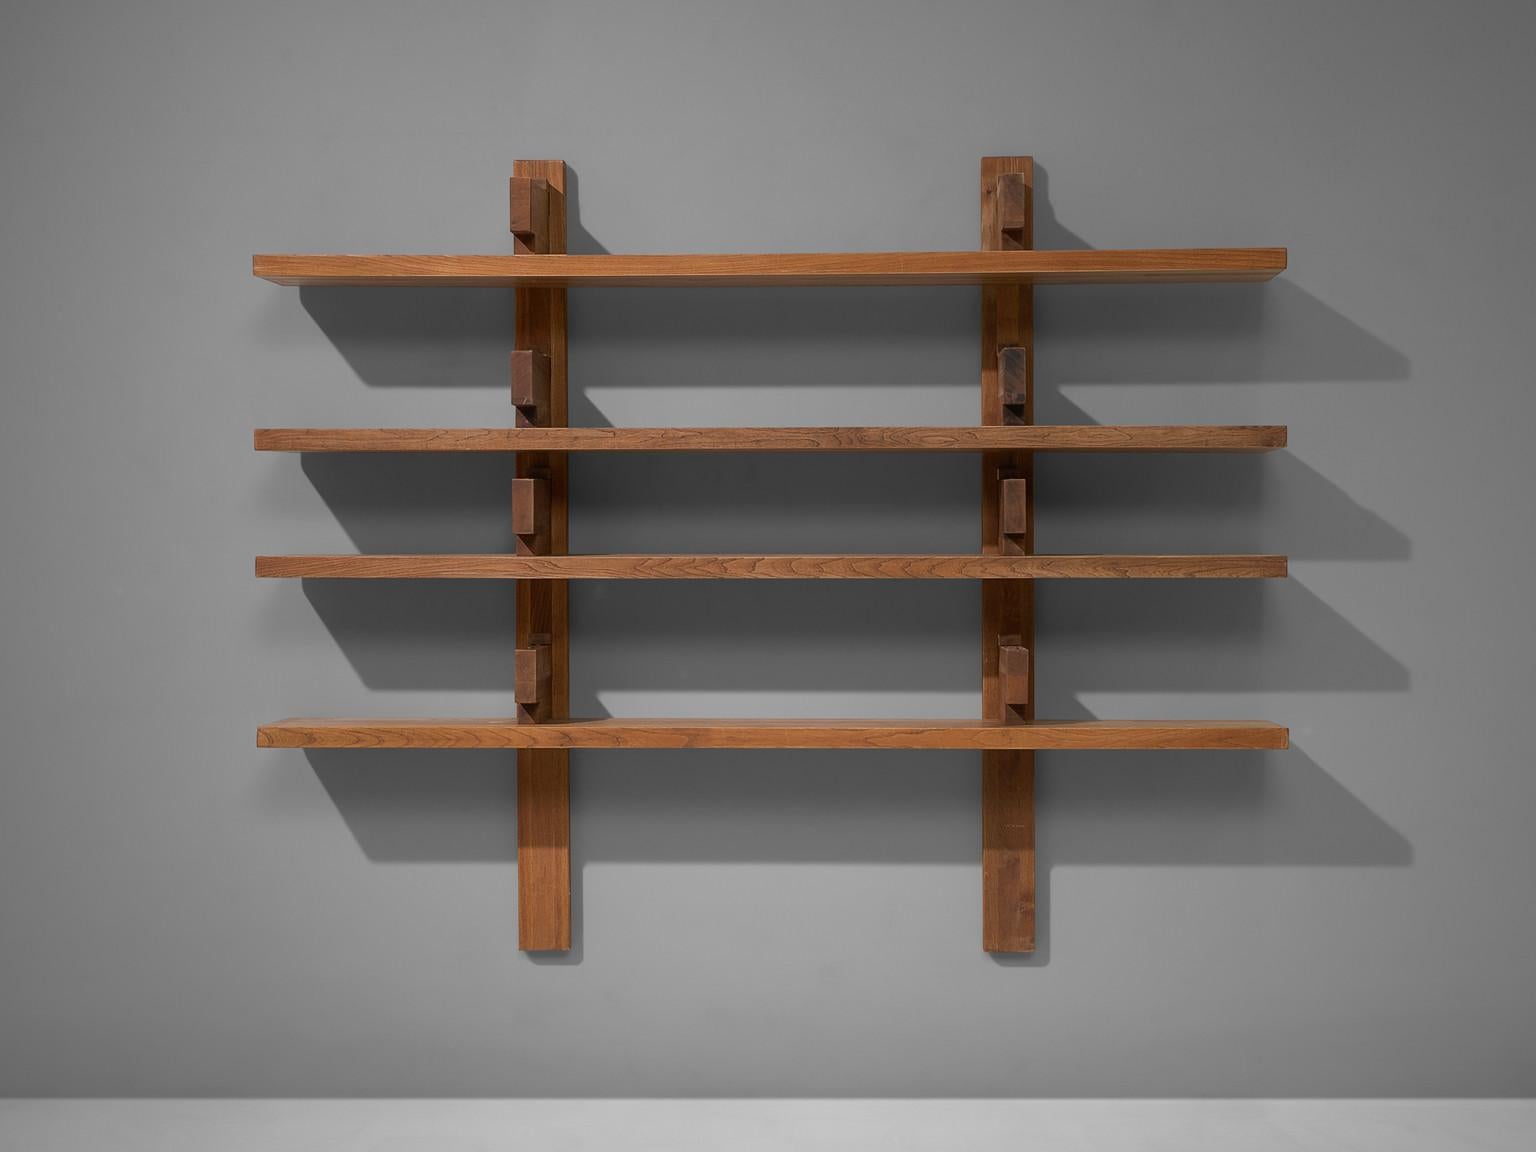 Pierre Chapo, bibliothèque, model no. B17, elm, France, 1960s. 

This is a rare and large model 'B17' - shelves designed by Pierre Chapo. It is the largest version of this quintessential piece by Chapo. The shelving system was created in 1967 were